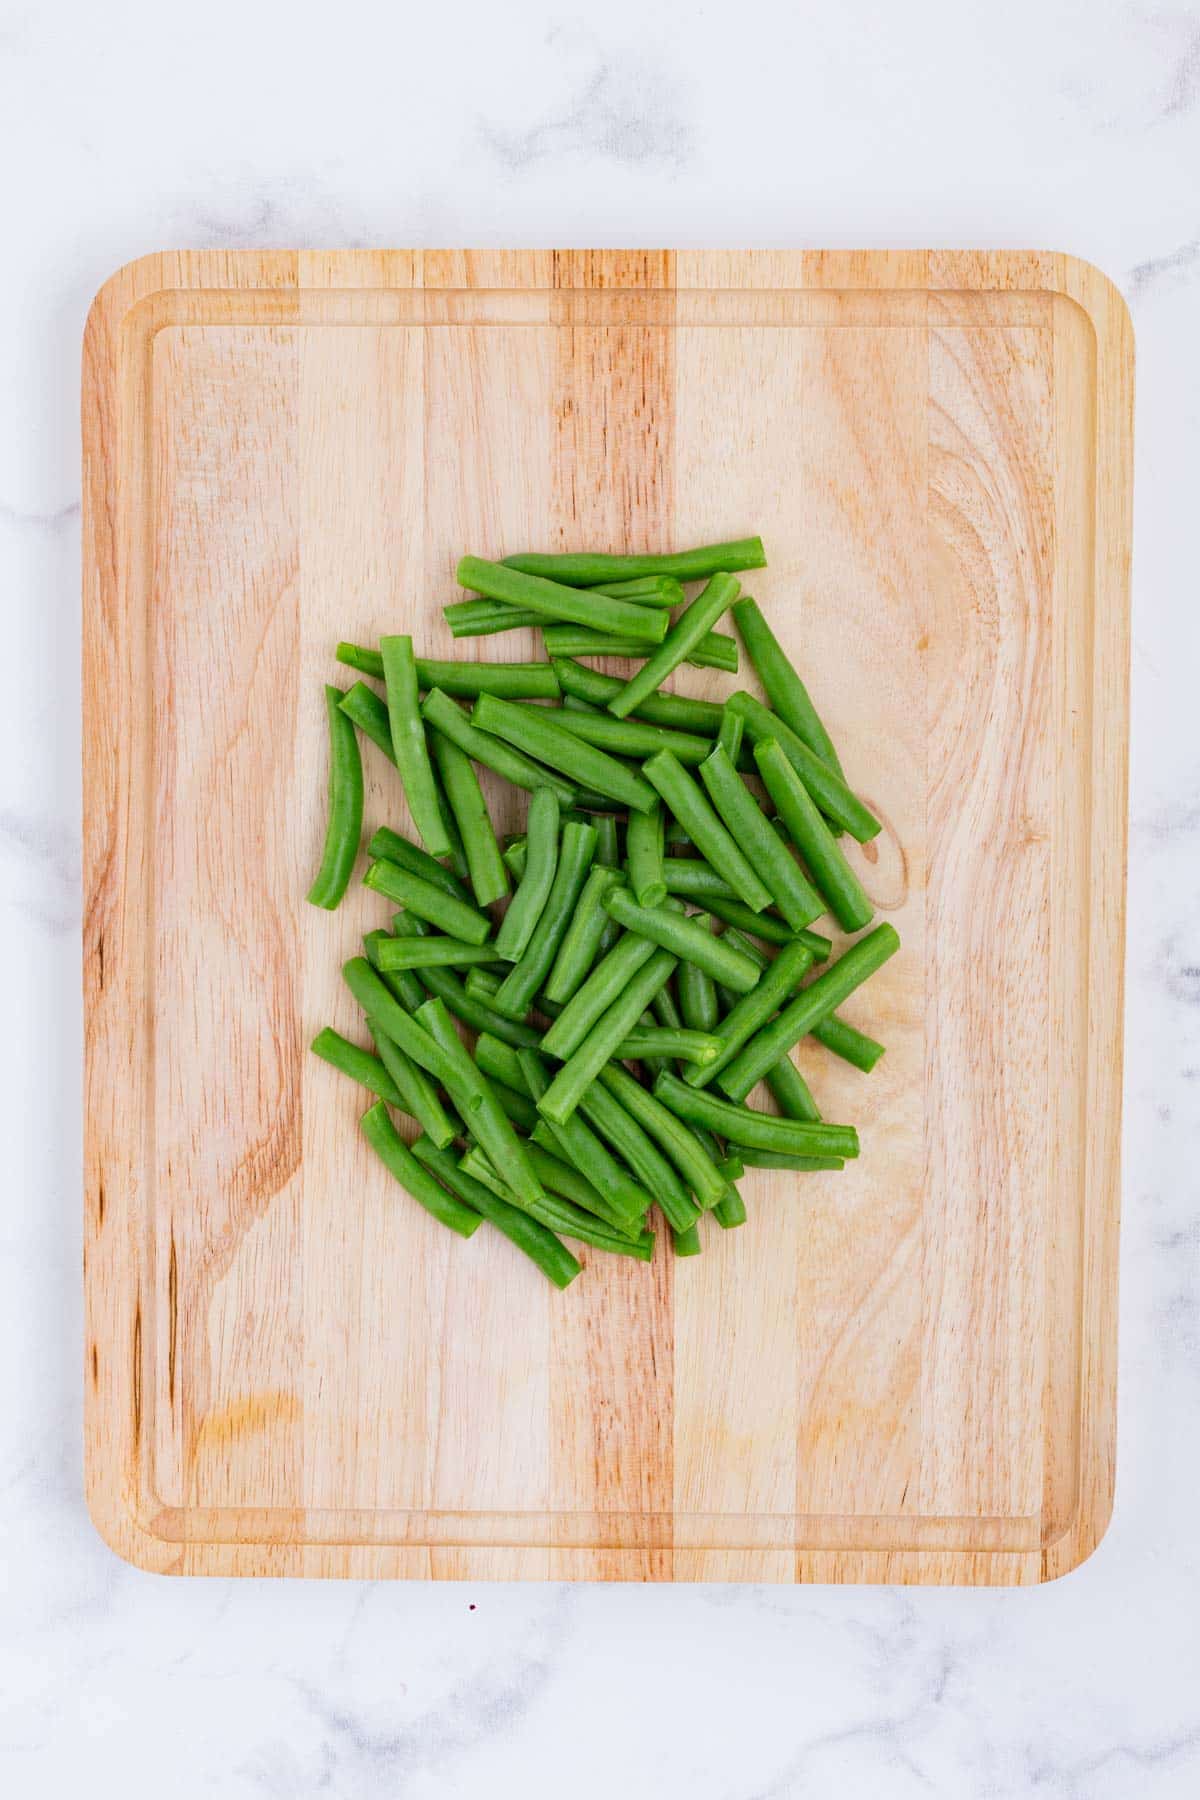 Green beans are trimmed and cut.